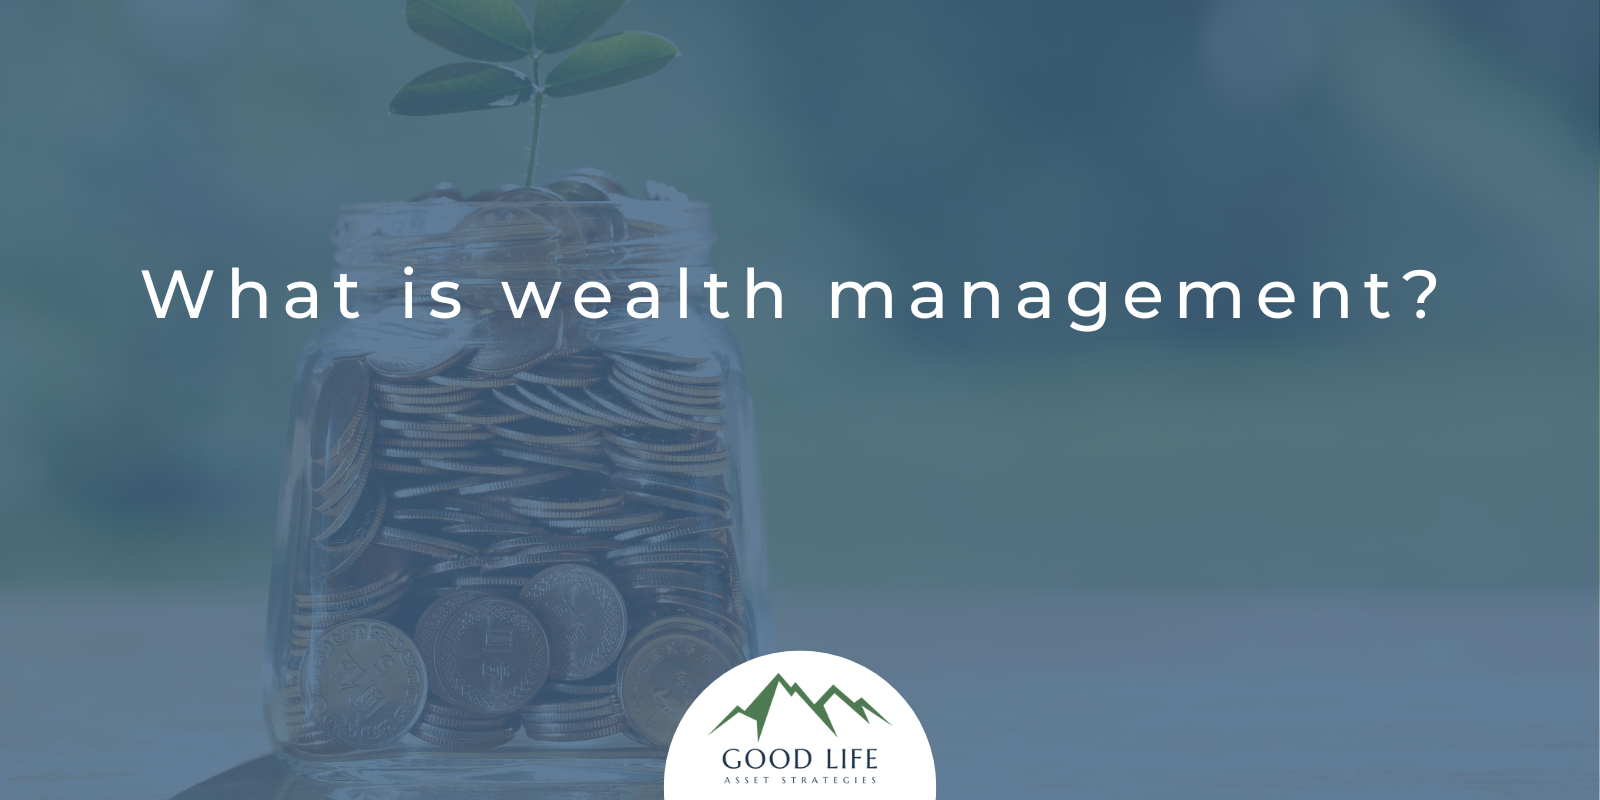 What is wealth management